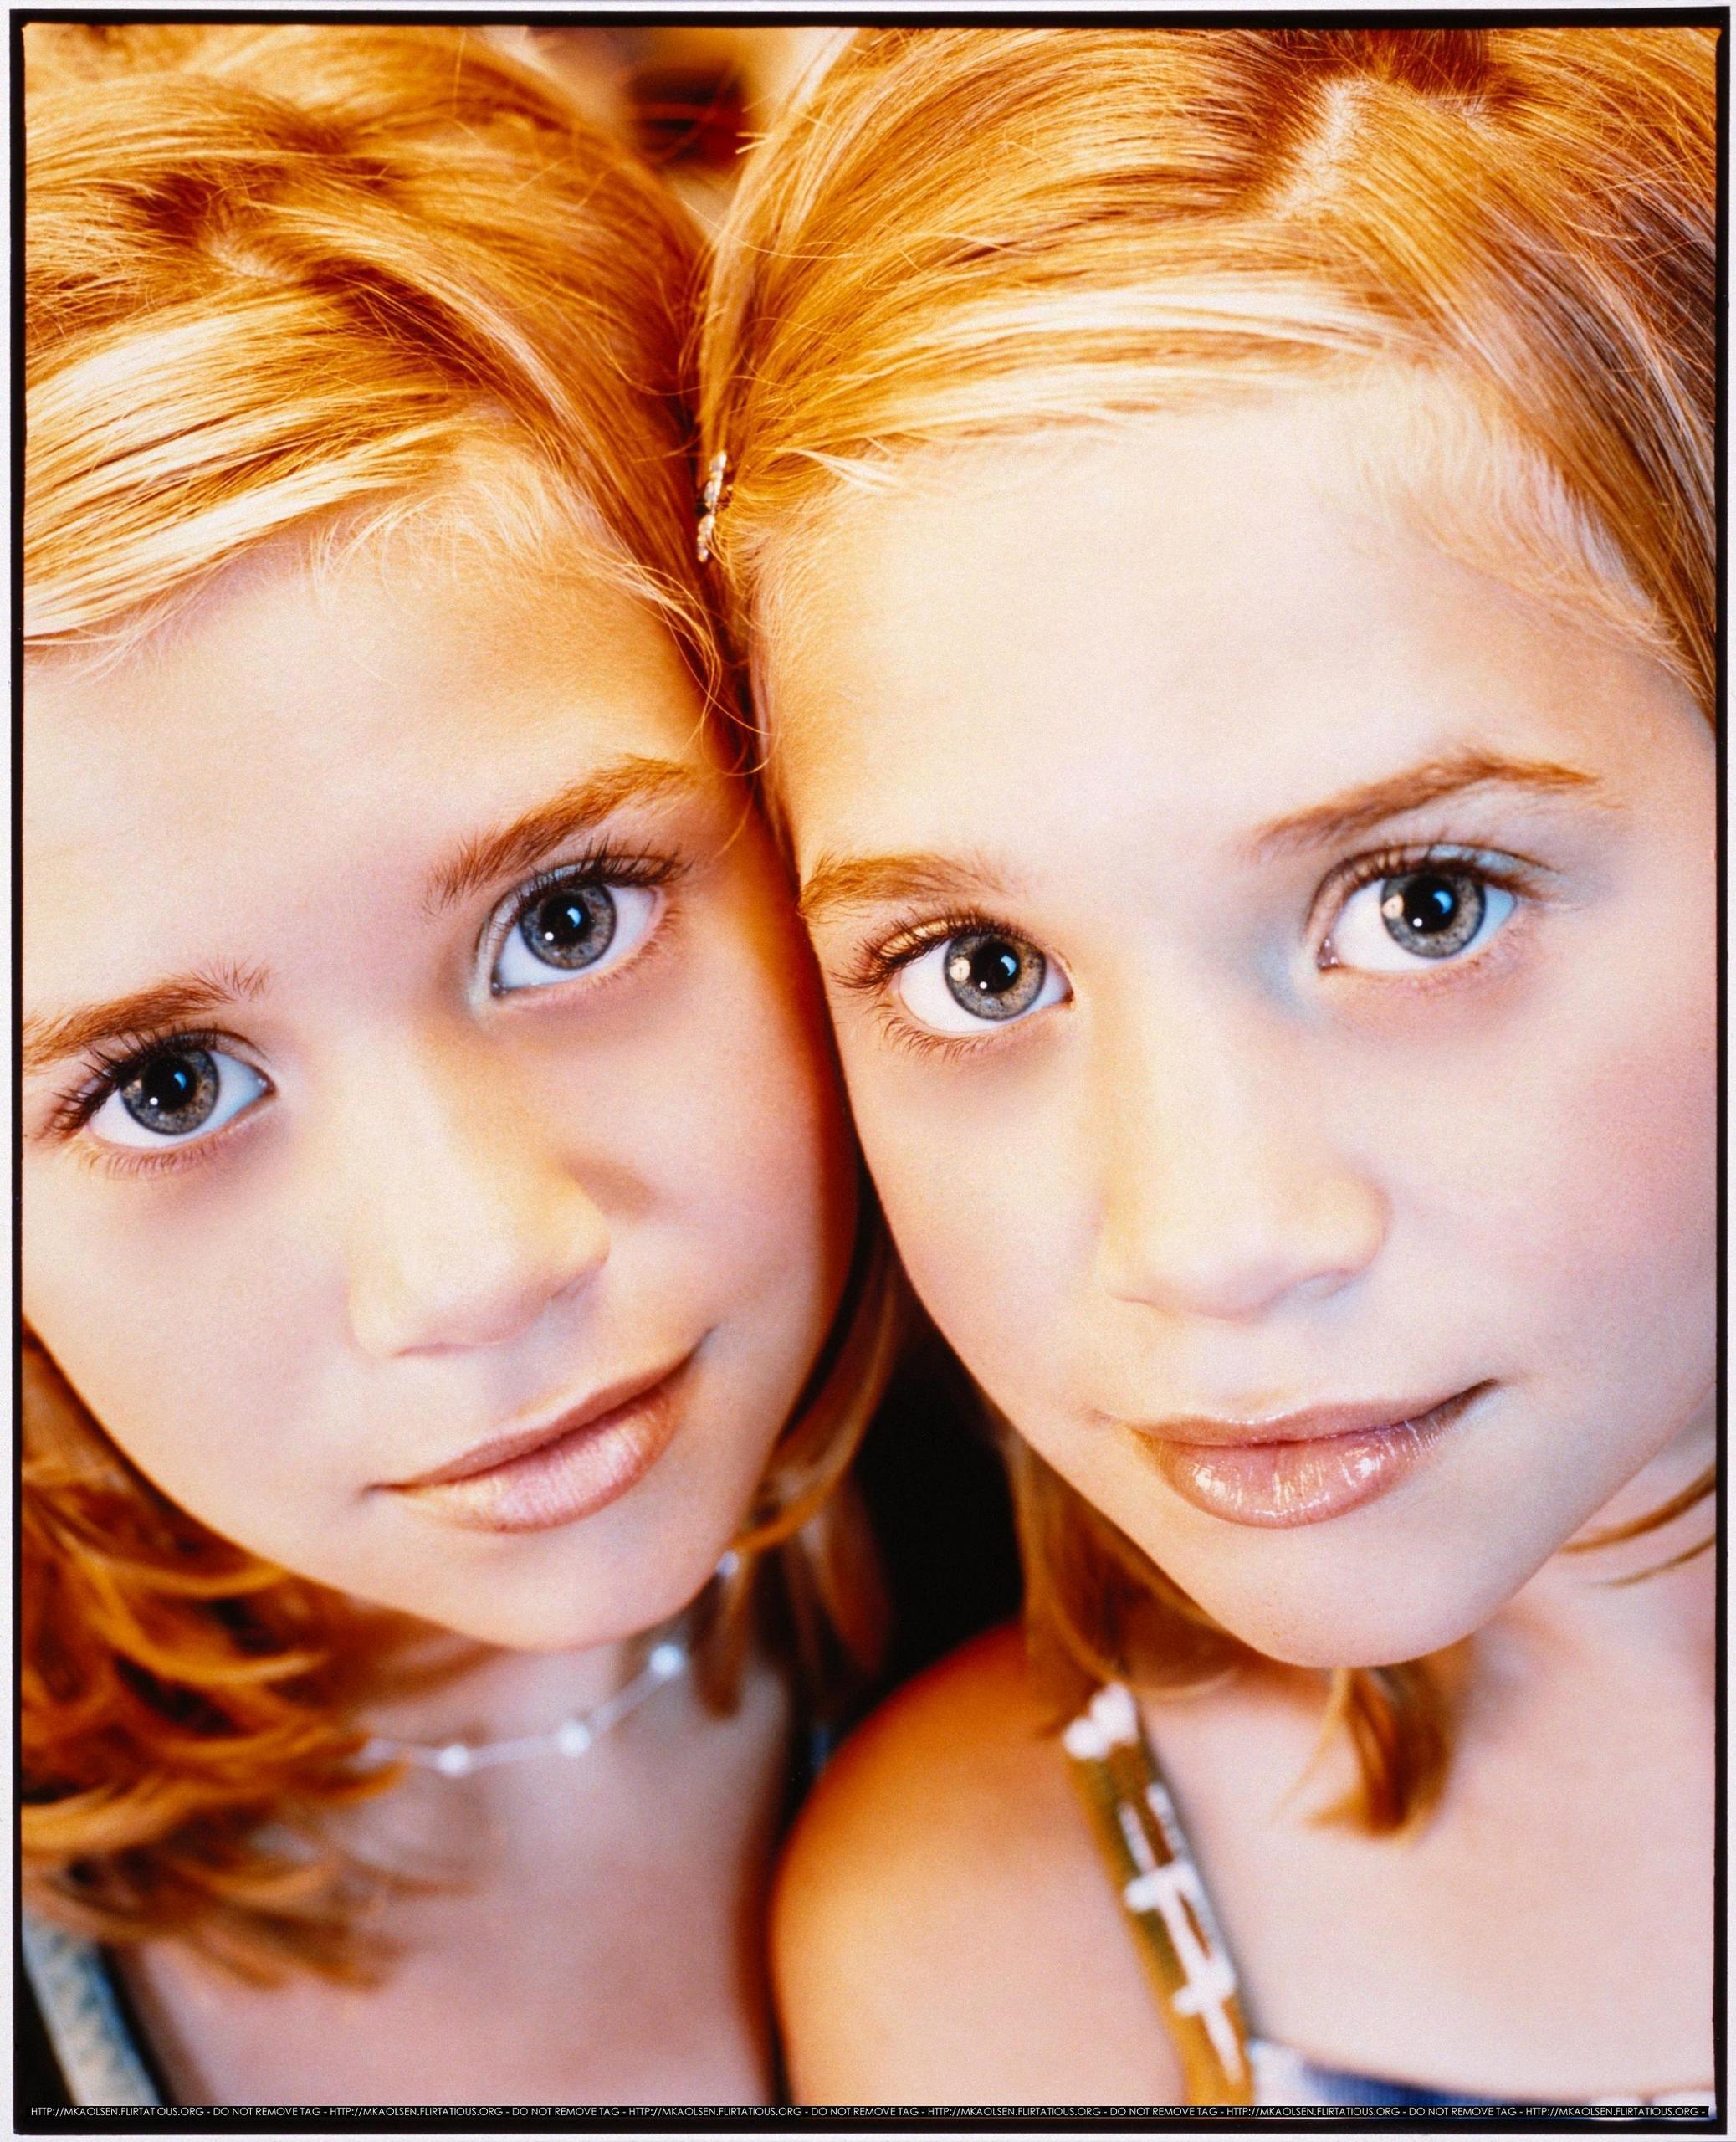 Olsen Twins - Picture Gallery